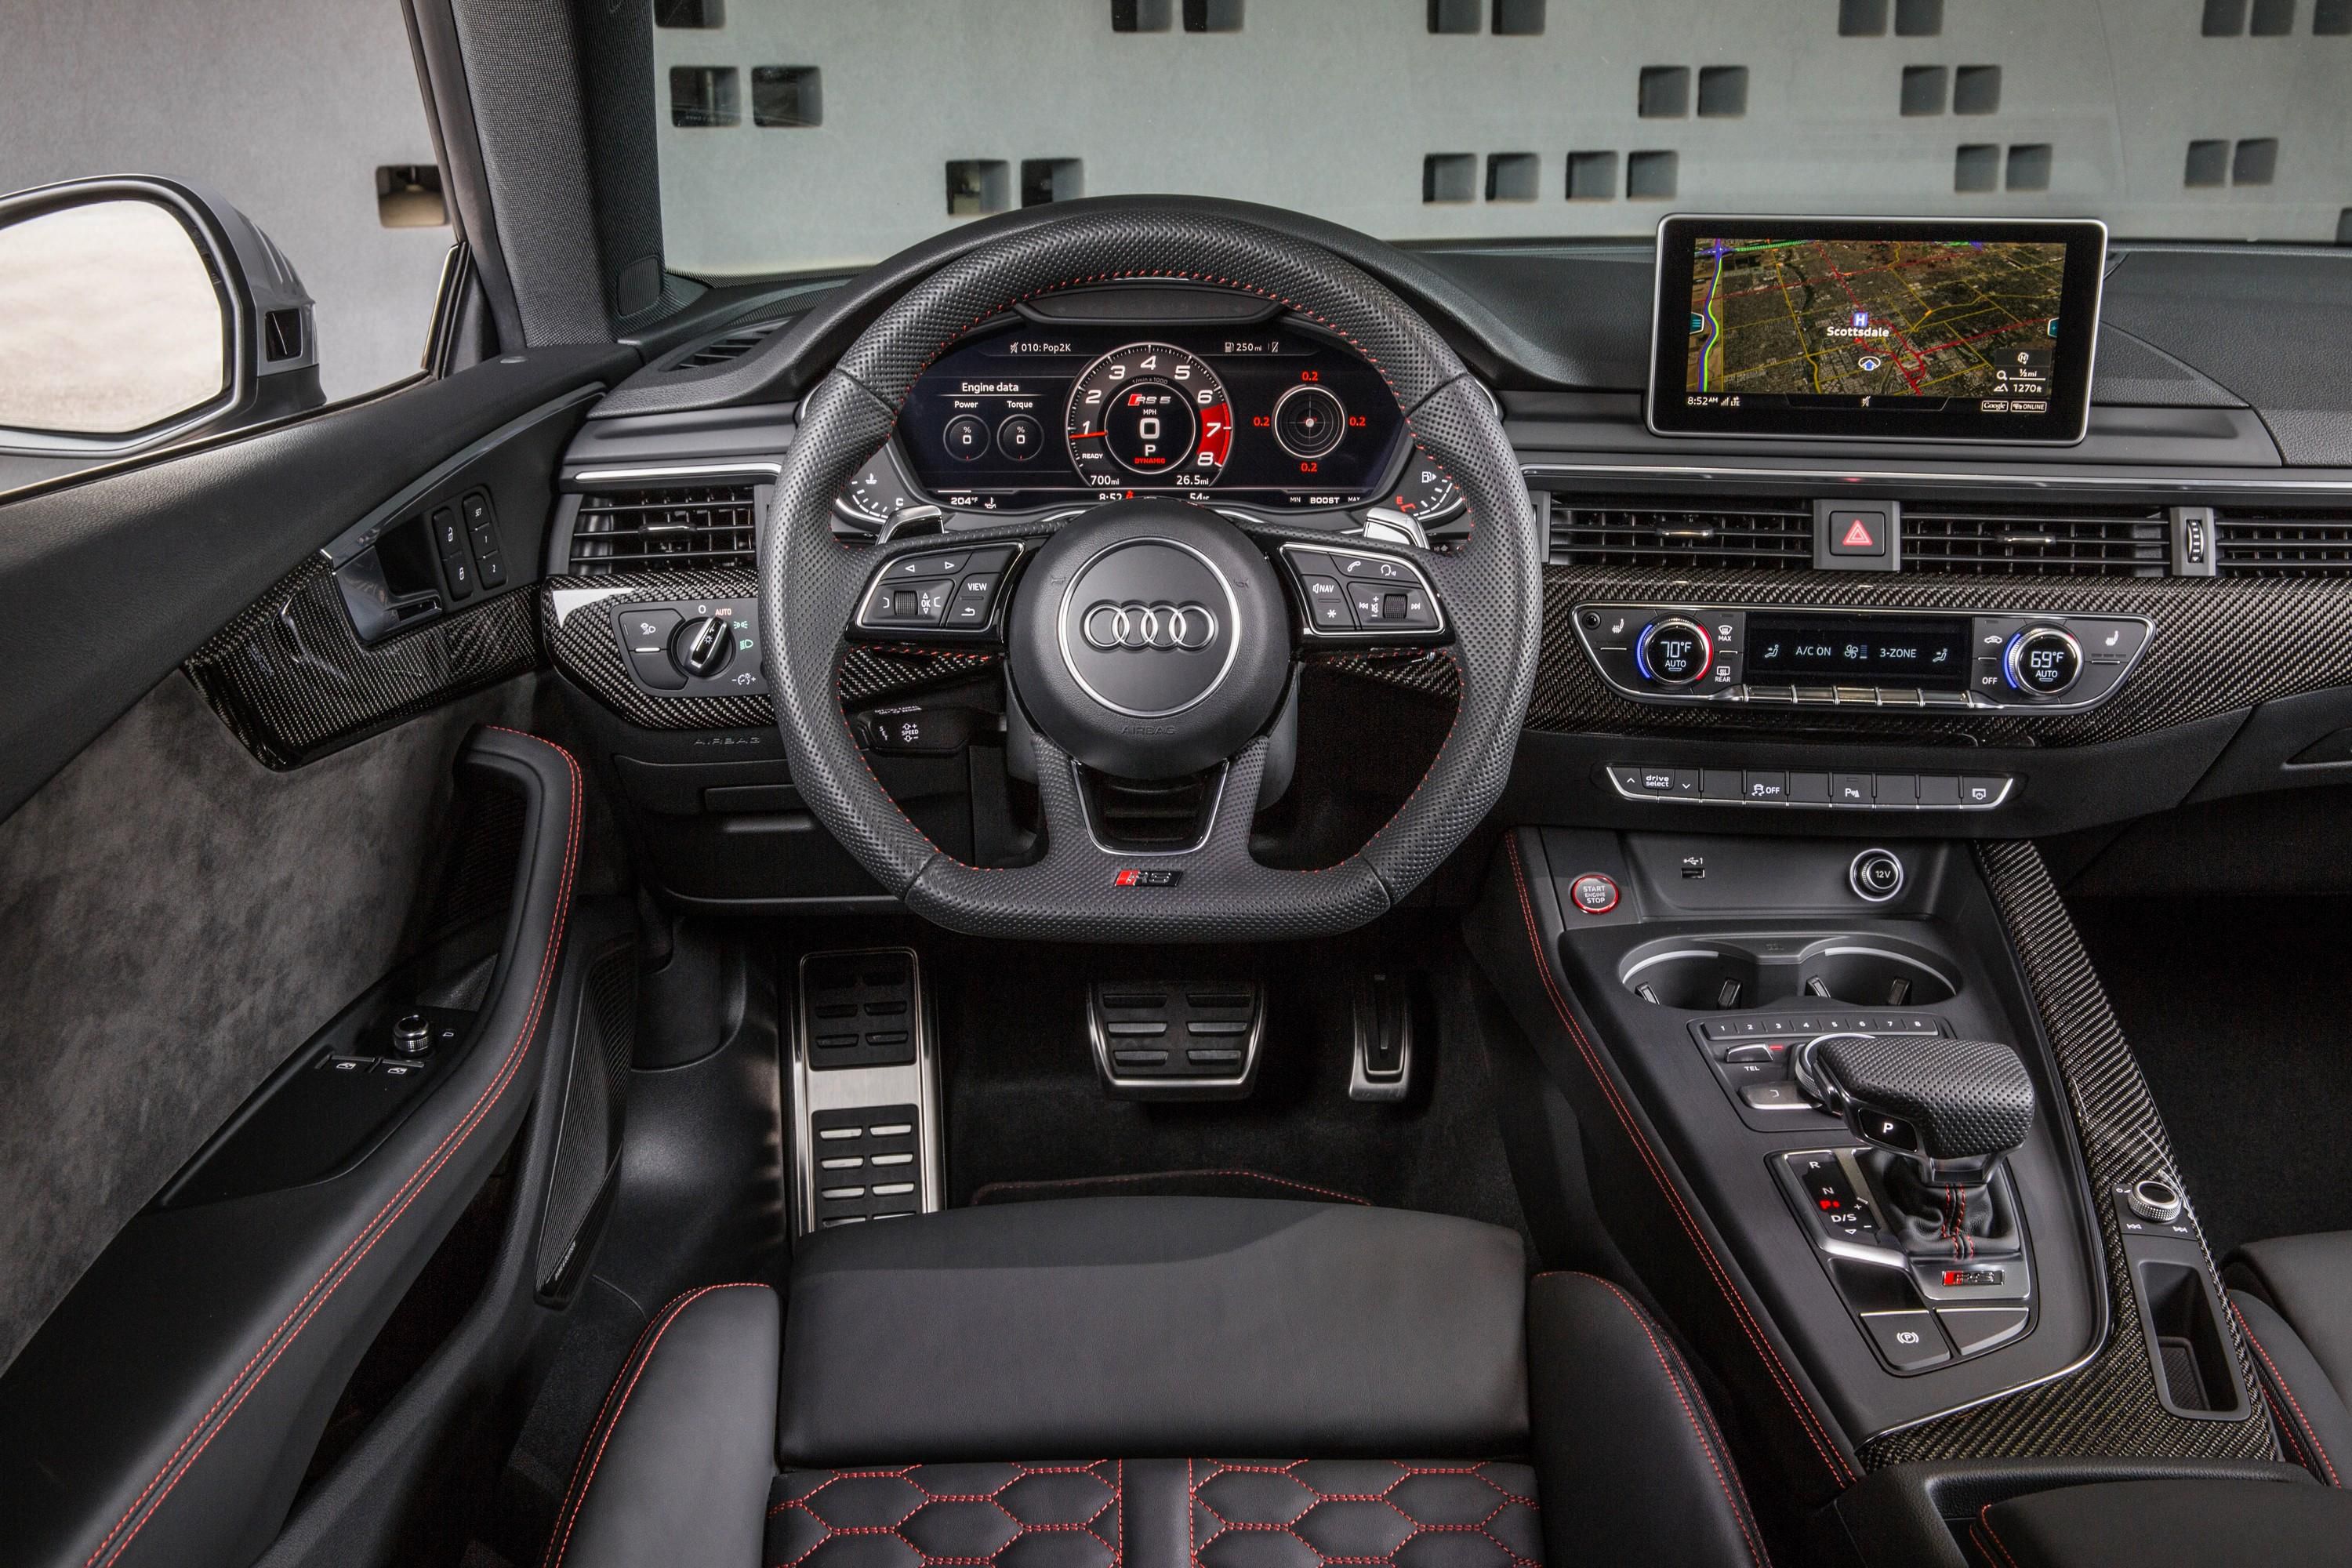 Audi A5 Cabriolet interior restyling